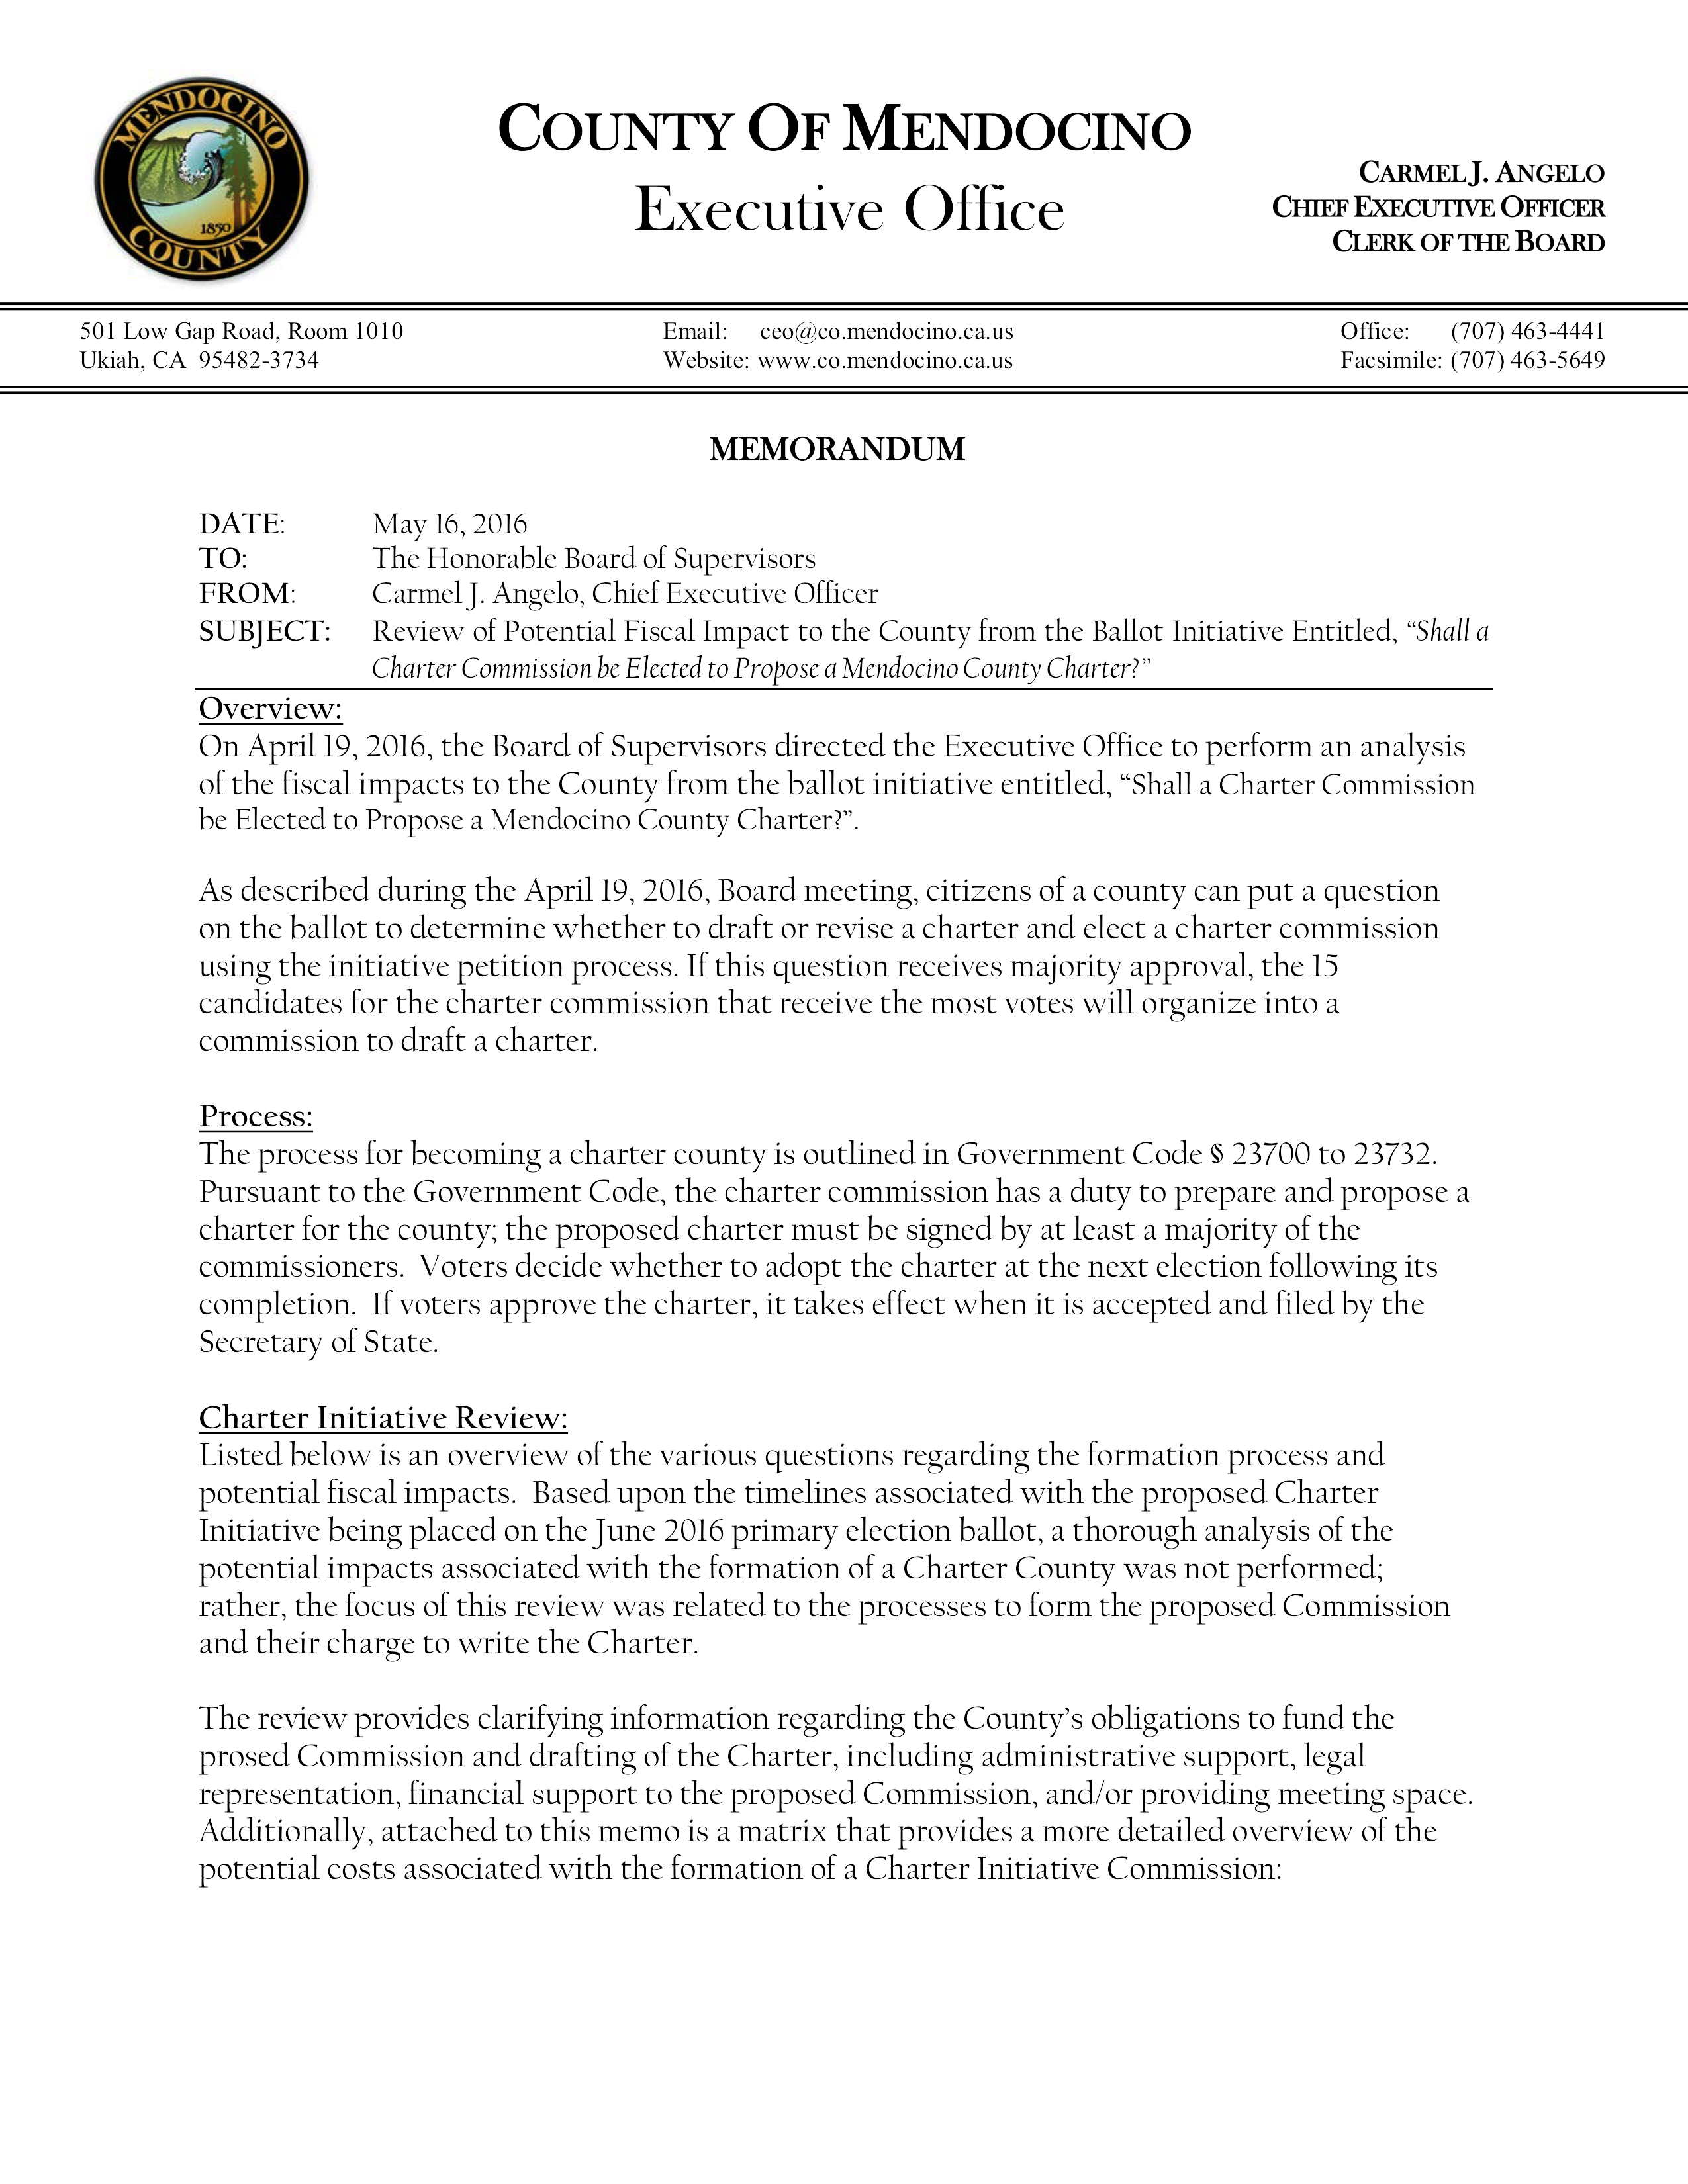 16-05-16 Potential Fiscal Impact of Measure W - P.1